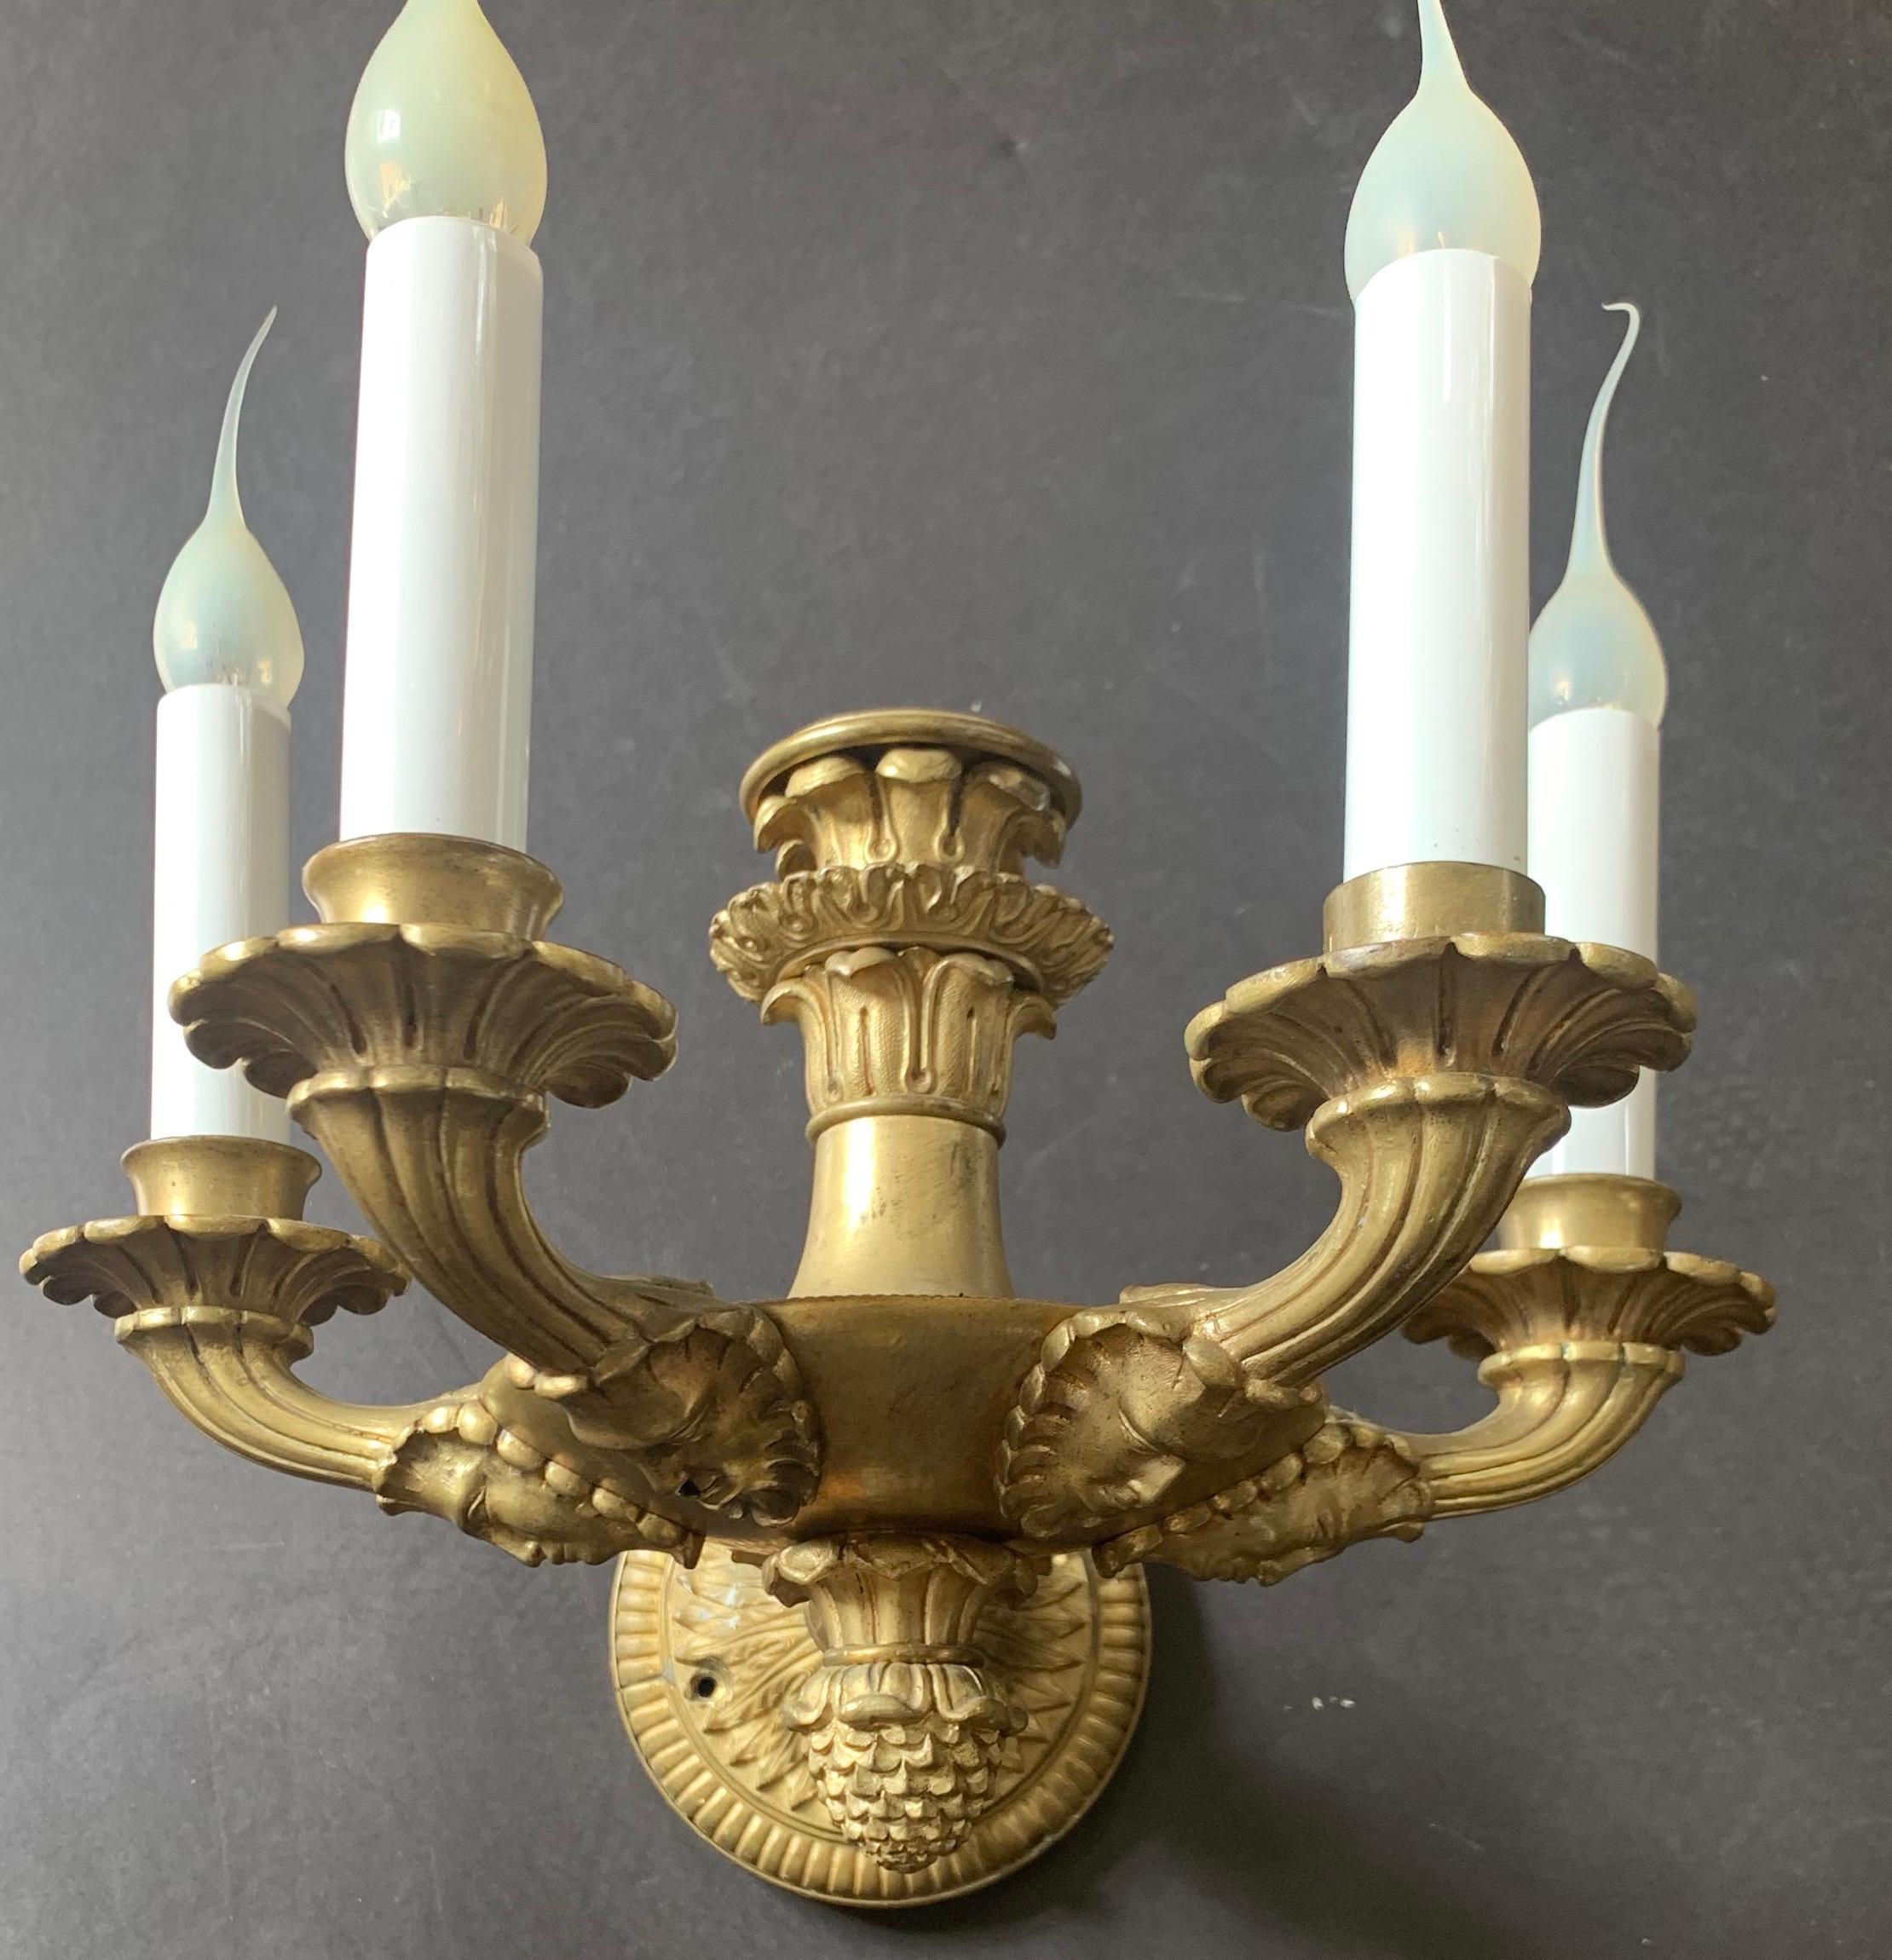 Wonderful Pair French Neoclassical Empire Bronze Figural 5-Arm Regency Sconces In Good Condition For Sale In Roslyn, NY